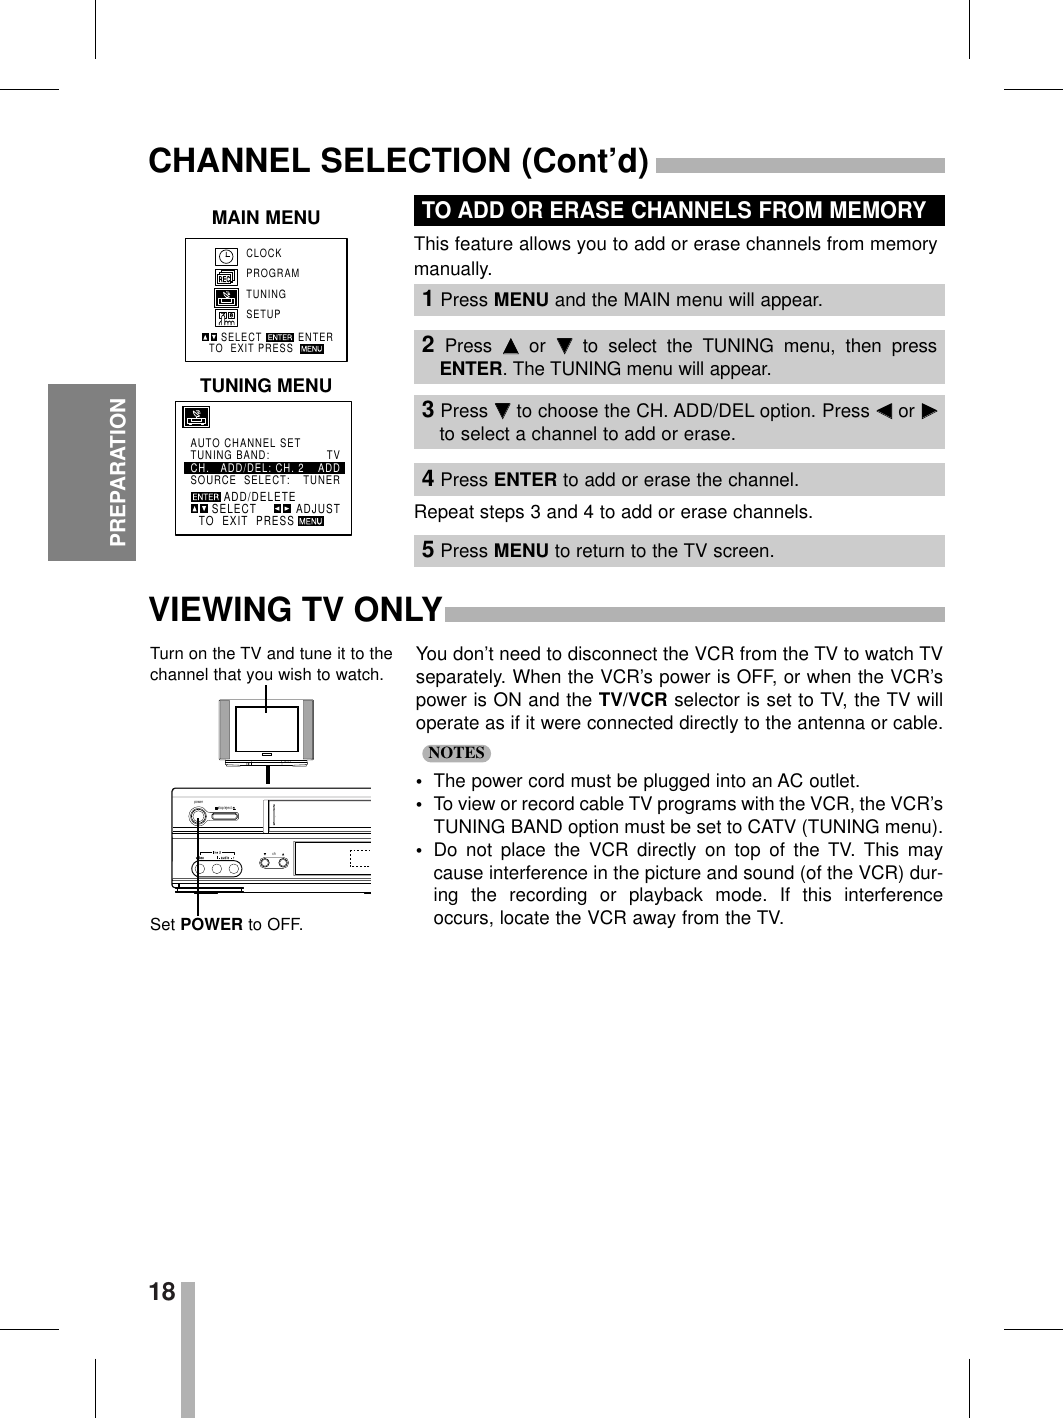 18PREPARATIONCHANNEL SELECTION (Cont’d)You don’t need to disconnect the VCR from the TV to watch TVseparately. When the VCR’s power is OFF, or when the VCR’spower is ON and the TV/VCR selector is set to TV, the TV willoperate as if it were connected directly to the antenna or cable.•The power cord must be plugged into an AC outlet.•To view or record cable TV programs with the VCR, the VCR’sTUNING BAND option must be set to CATV (TUNING menu).•Do not place the VCR directly on top of the TV. This maycause interference in the picture and sound (of the VCR) dur-ing the recording or playback mode. If this interferenceoccurs, locate the VCR away from the TV.NOTESpowerstop/ejectchTurn on the TV and tune it to thechannel that you wish to watch.Set POWER to OFF.ADD/DELETEAUTO CHANNEL SETTUNING BAND:     TVCH.   ADD/DEL: CH. 2 ADDSOURCE  SELECT: TUNERSELECTTO  EXIT  PRESSADJUSTThis feature allows you to add or erase channels from memorymanually.Repeat steps 3 and 4 to add or erase channels.TO ADD OR ERASE CHANNELS FROM MEMORYVIEWING TV ONLYCLOCKPROGRAMTUNINGSETUPSELECTTO  EXIT PRESS ENTERMAIN MENUTUNING MENU1Press MENU and the MAIN menu will appear.2Press  DDor  EEto select the TUNING menu, then pressENTER. The TUNING menu will appear.3Press EEto choose the CH. ADD/DEL option. Press FFor GGto select a channel to add or erase.4Press ENTER to add or erase the channel.5Press MENU to return to the TV screen.